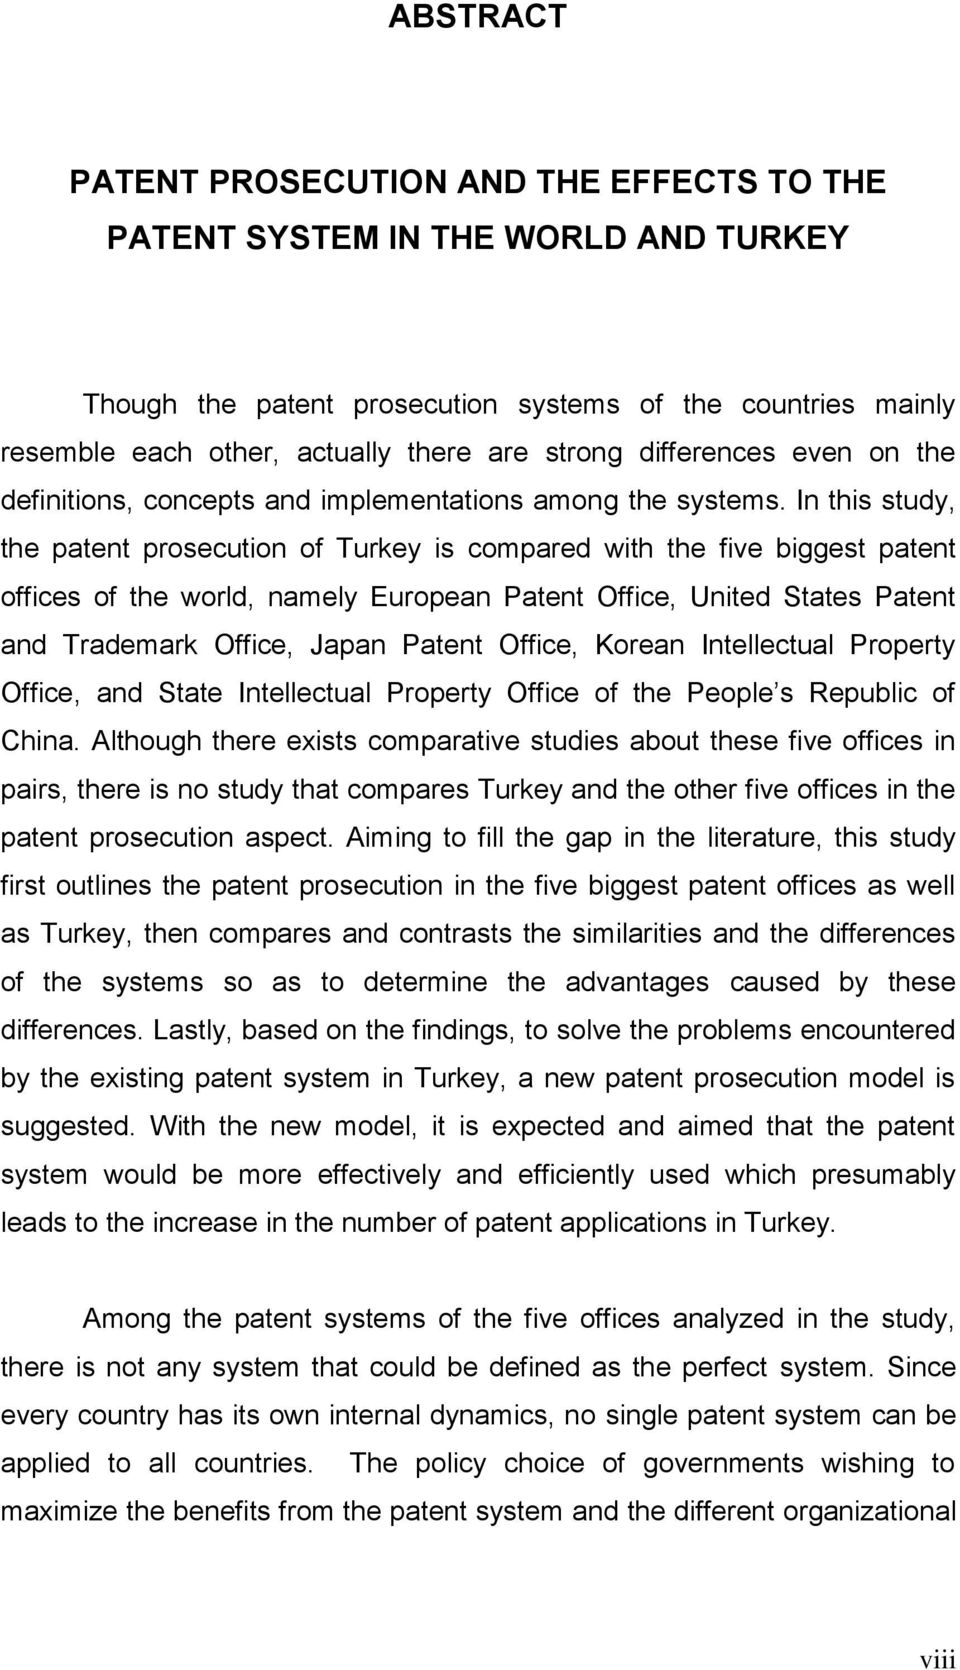 In this study, the patent prosecution of Turkey is compared with the five biggest patent offices of the world, namely European Patent Office, United States Patent and Trademark Office, Japan Patent